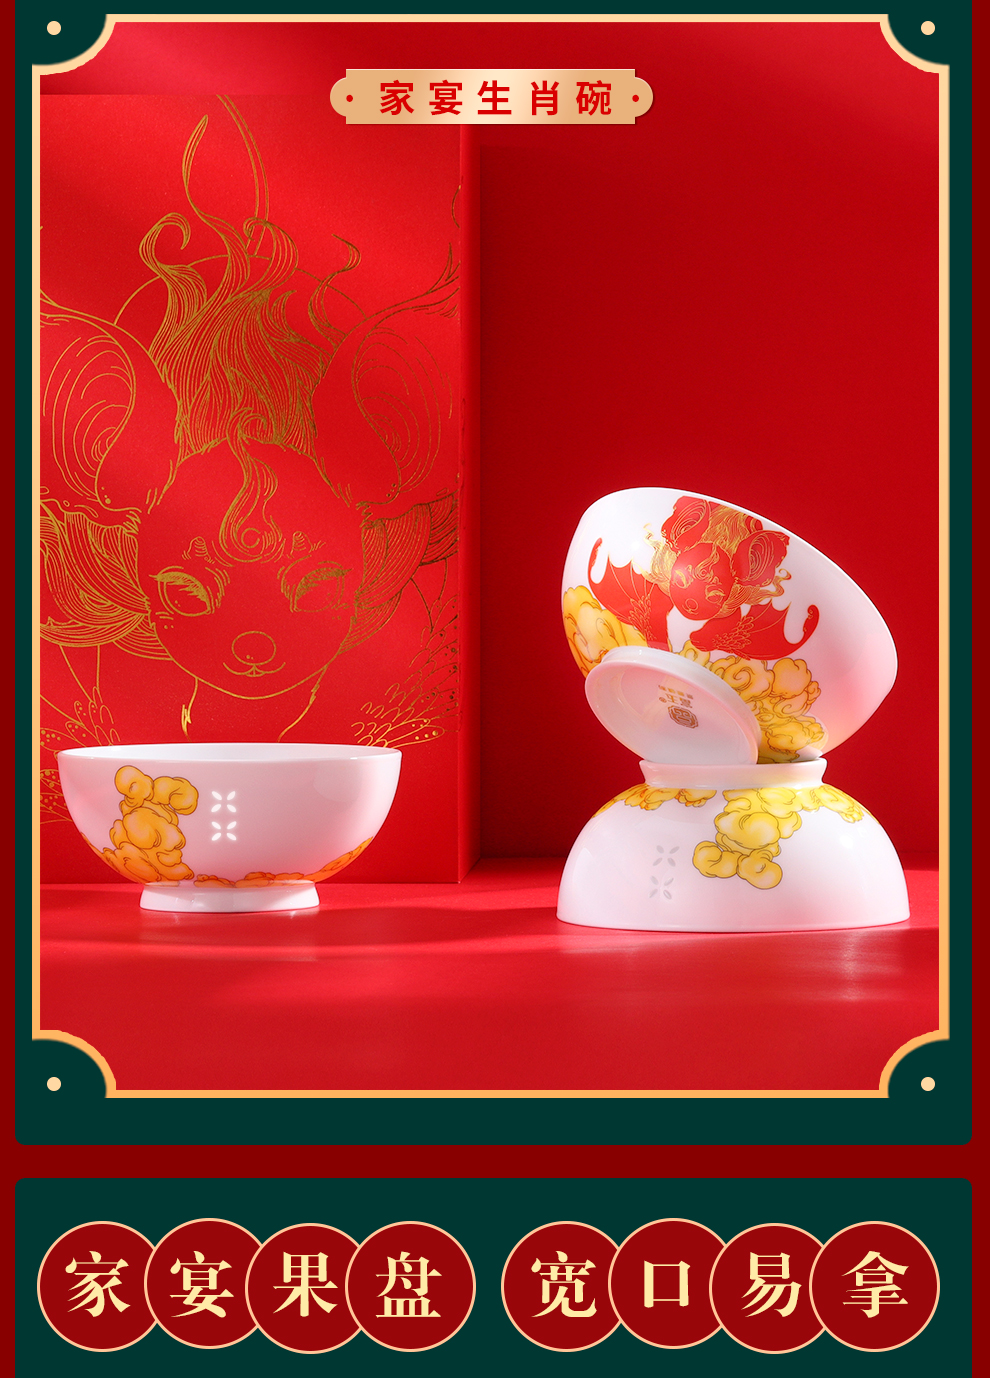 Jingdezhen flagship store in the New Year we package ceramic zodiac eat rice bowl, compote wine suits for the teapot